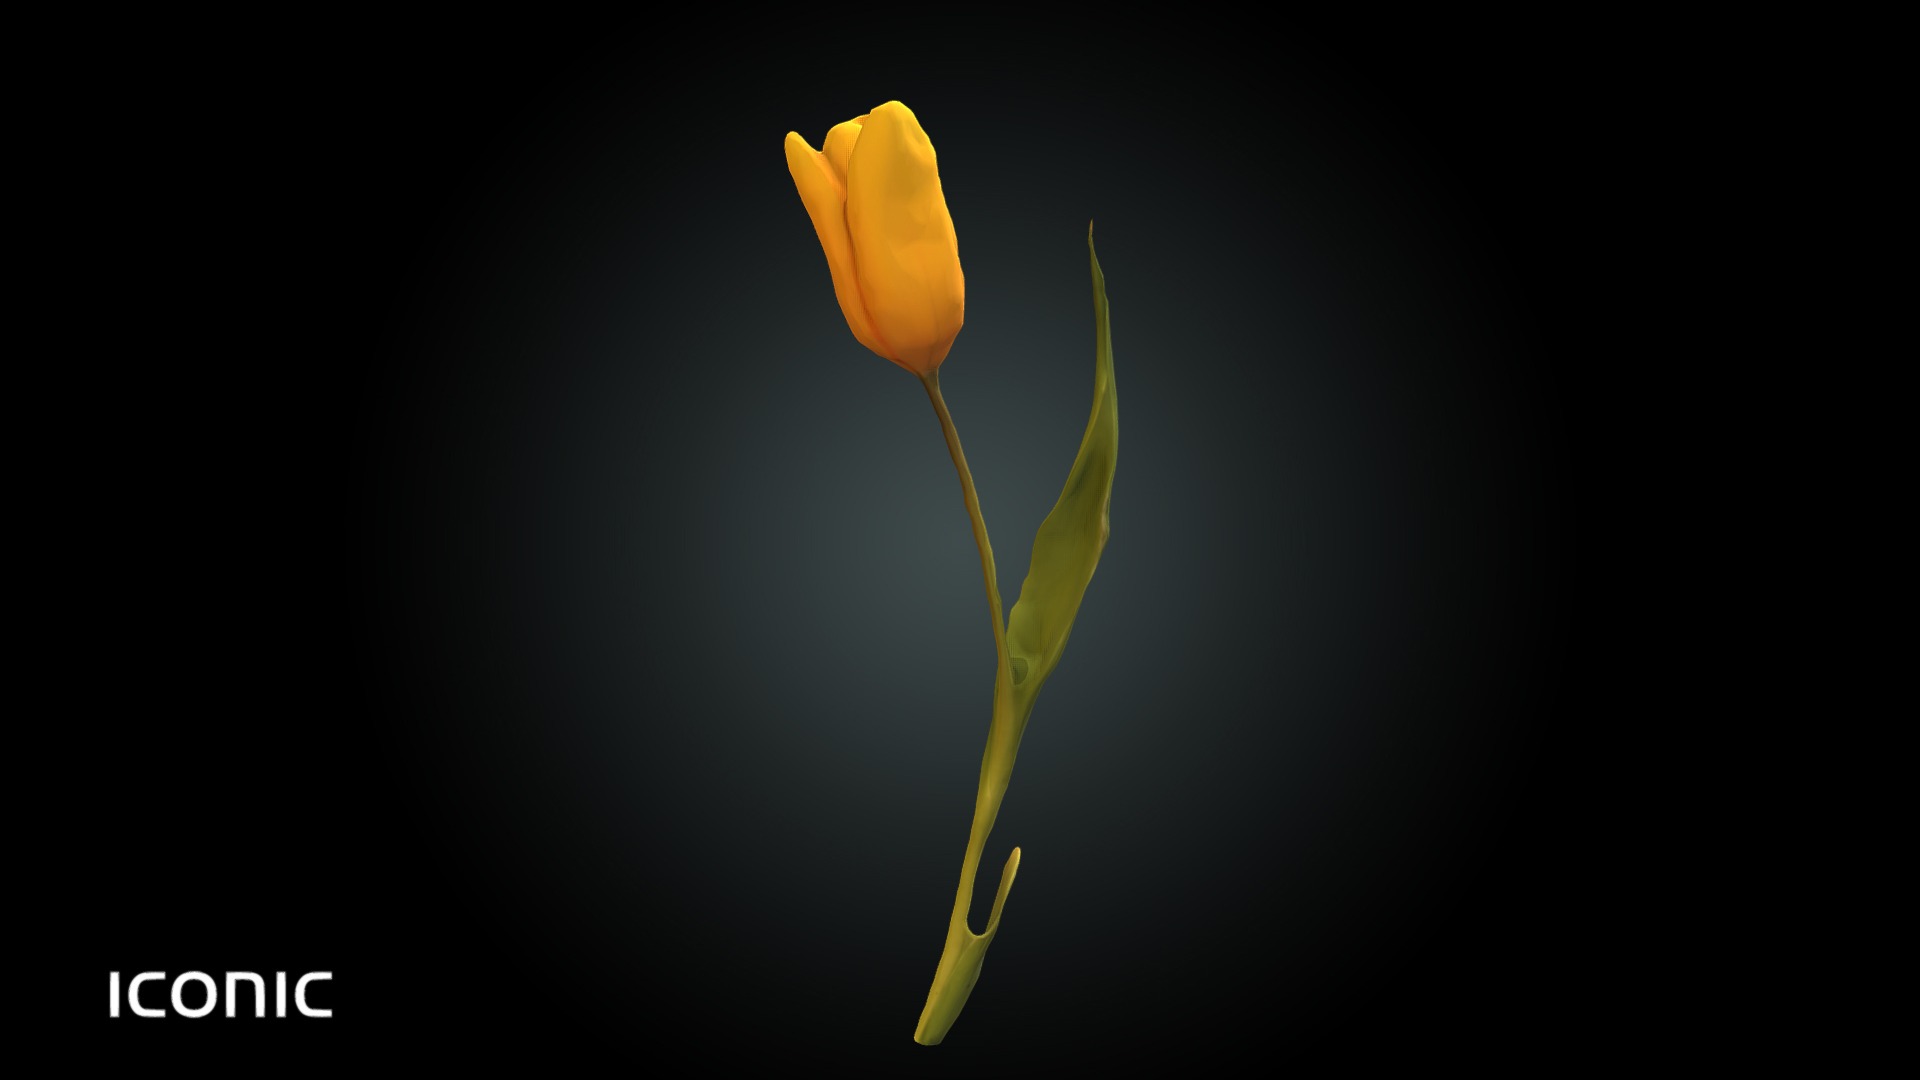 3D model Fw15 – Tulip Yellow - This is a 3D model of the Fw15 - Tulip Yellow. The 3D model is about a close-up of a flower.